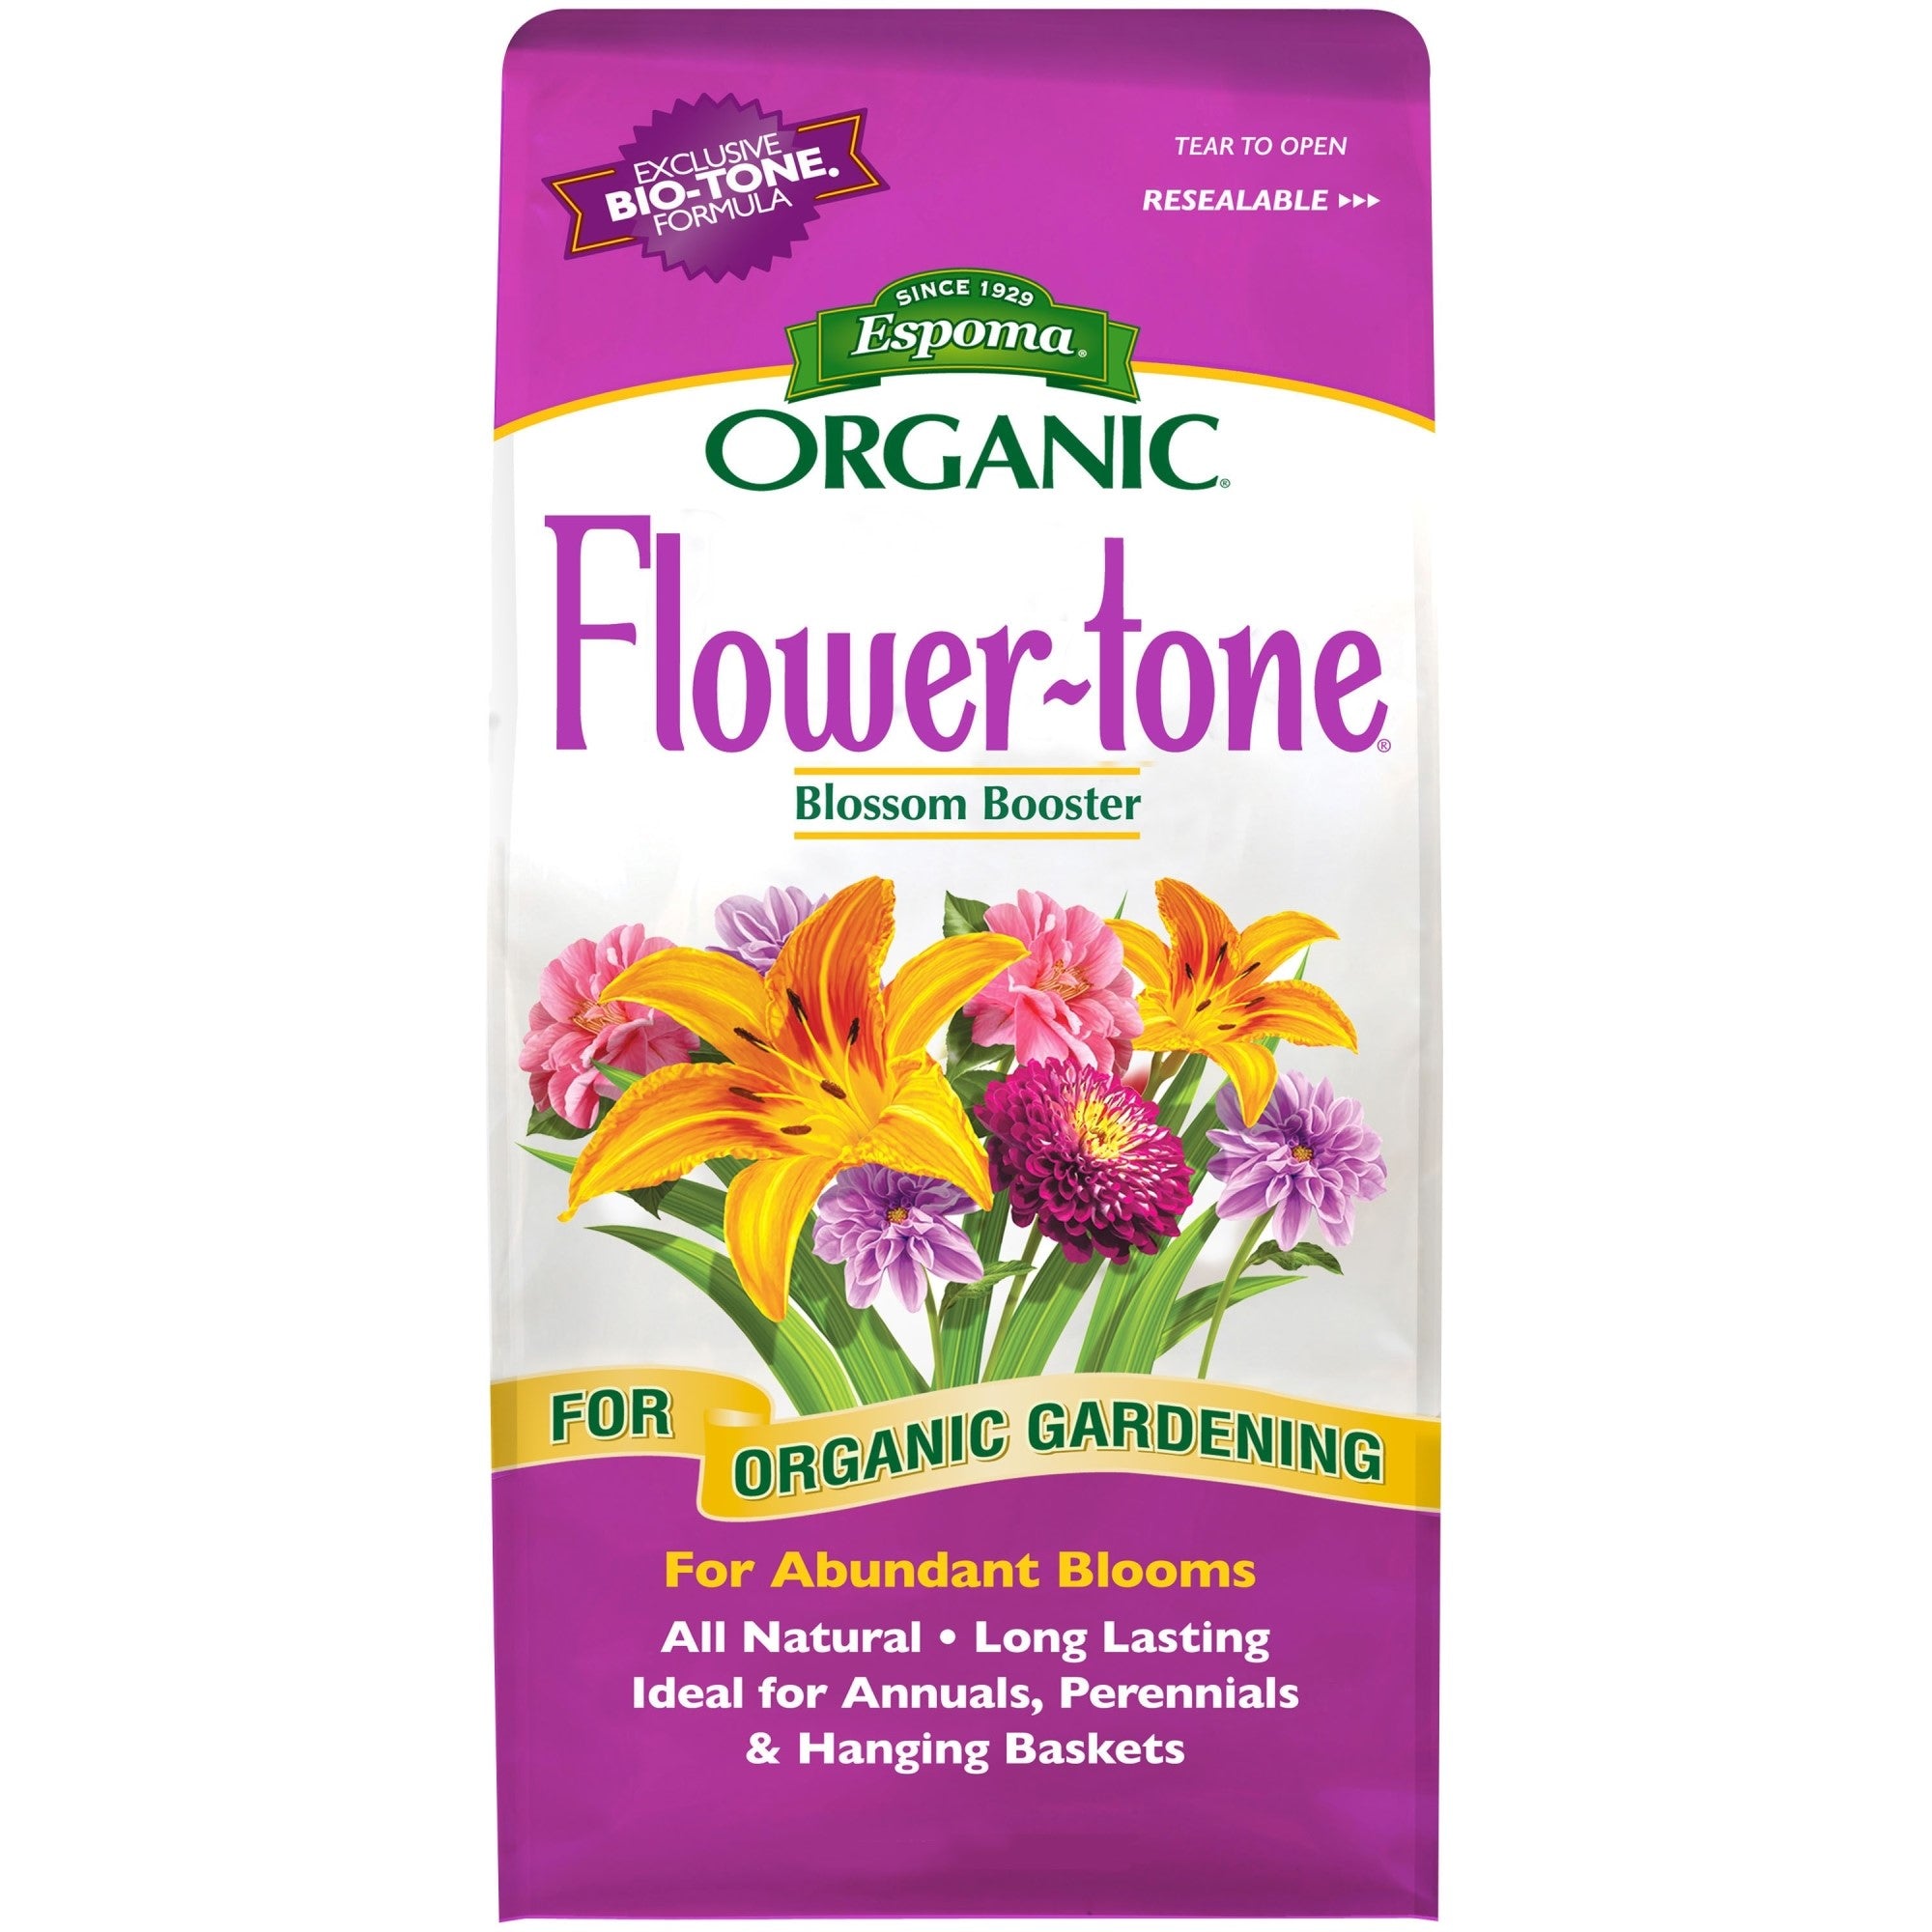 Espoma Organic Flower-tone 3-4-5 Blossom Booster for Organic Gardening for Flowers, Annuals, Perennials & Hanging Baskets